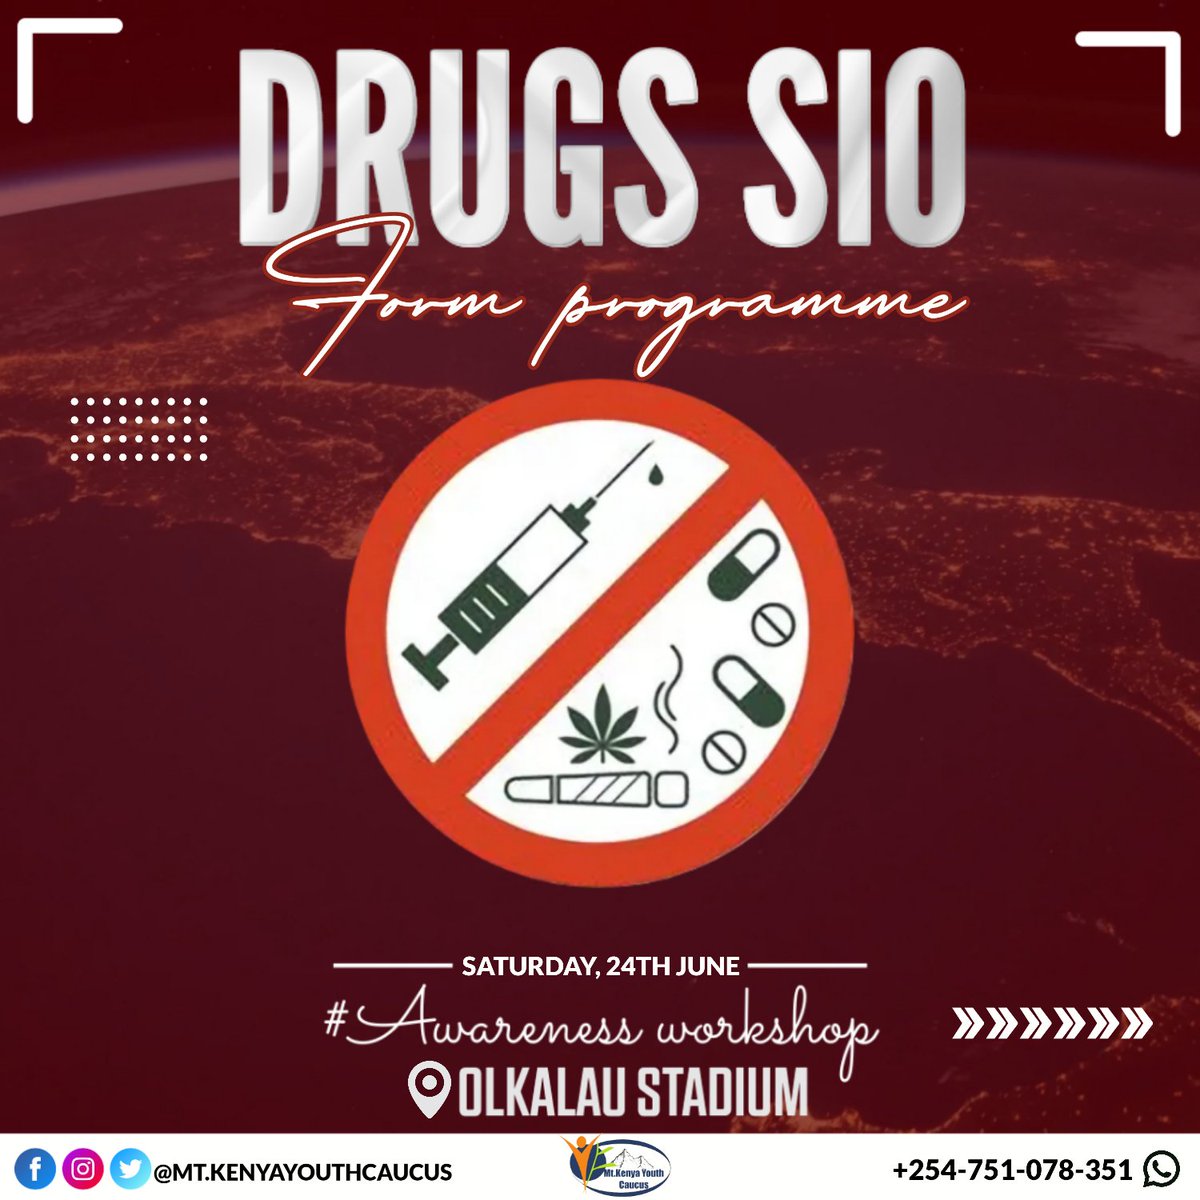 We are victims of drugs abuse ,by broken families ,violent marriages and broken kins. 
It's time to come together fight the demagogue. 
#saynotodrugs #MSDhoni𓃵 #MSDhoni #Cannes2023 #JENNIEatCANNES #TheLittleMermaid